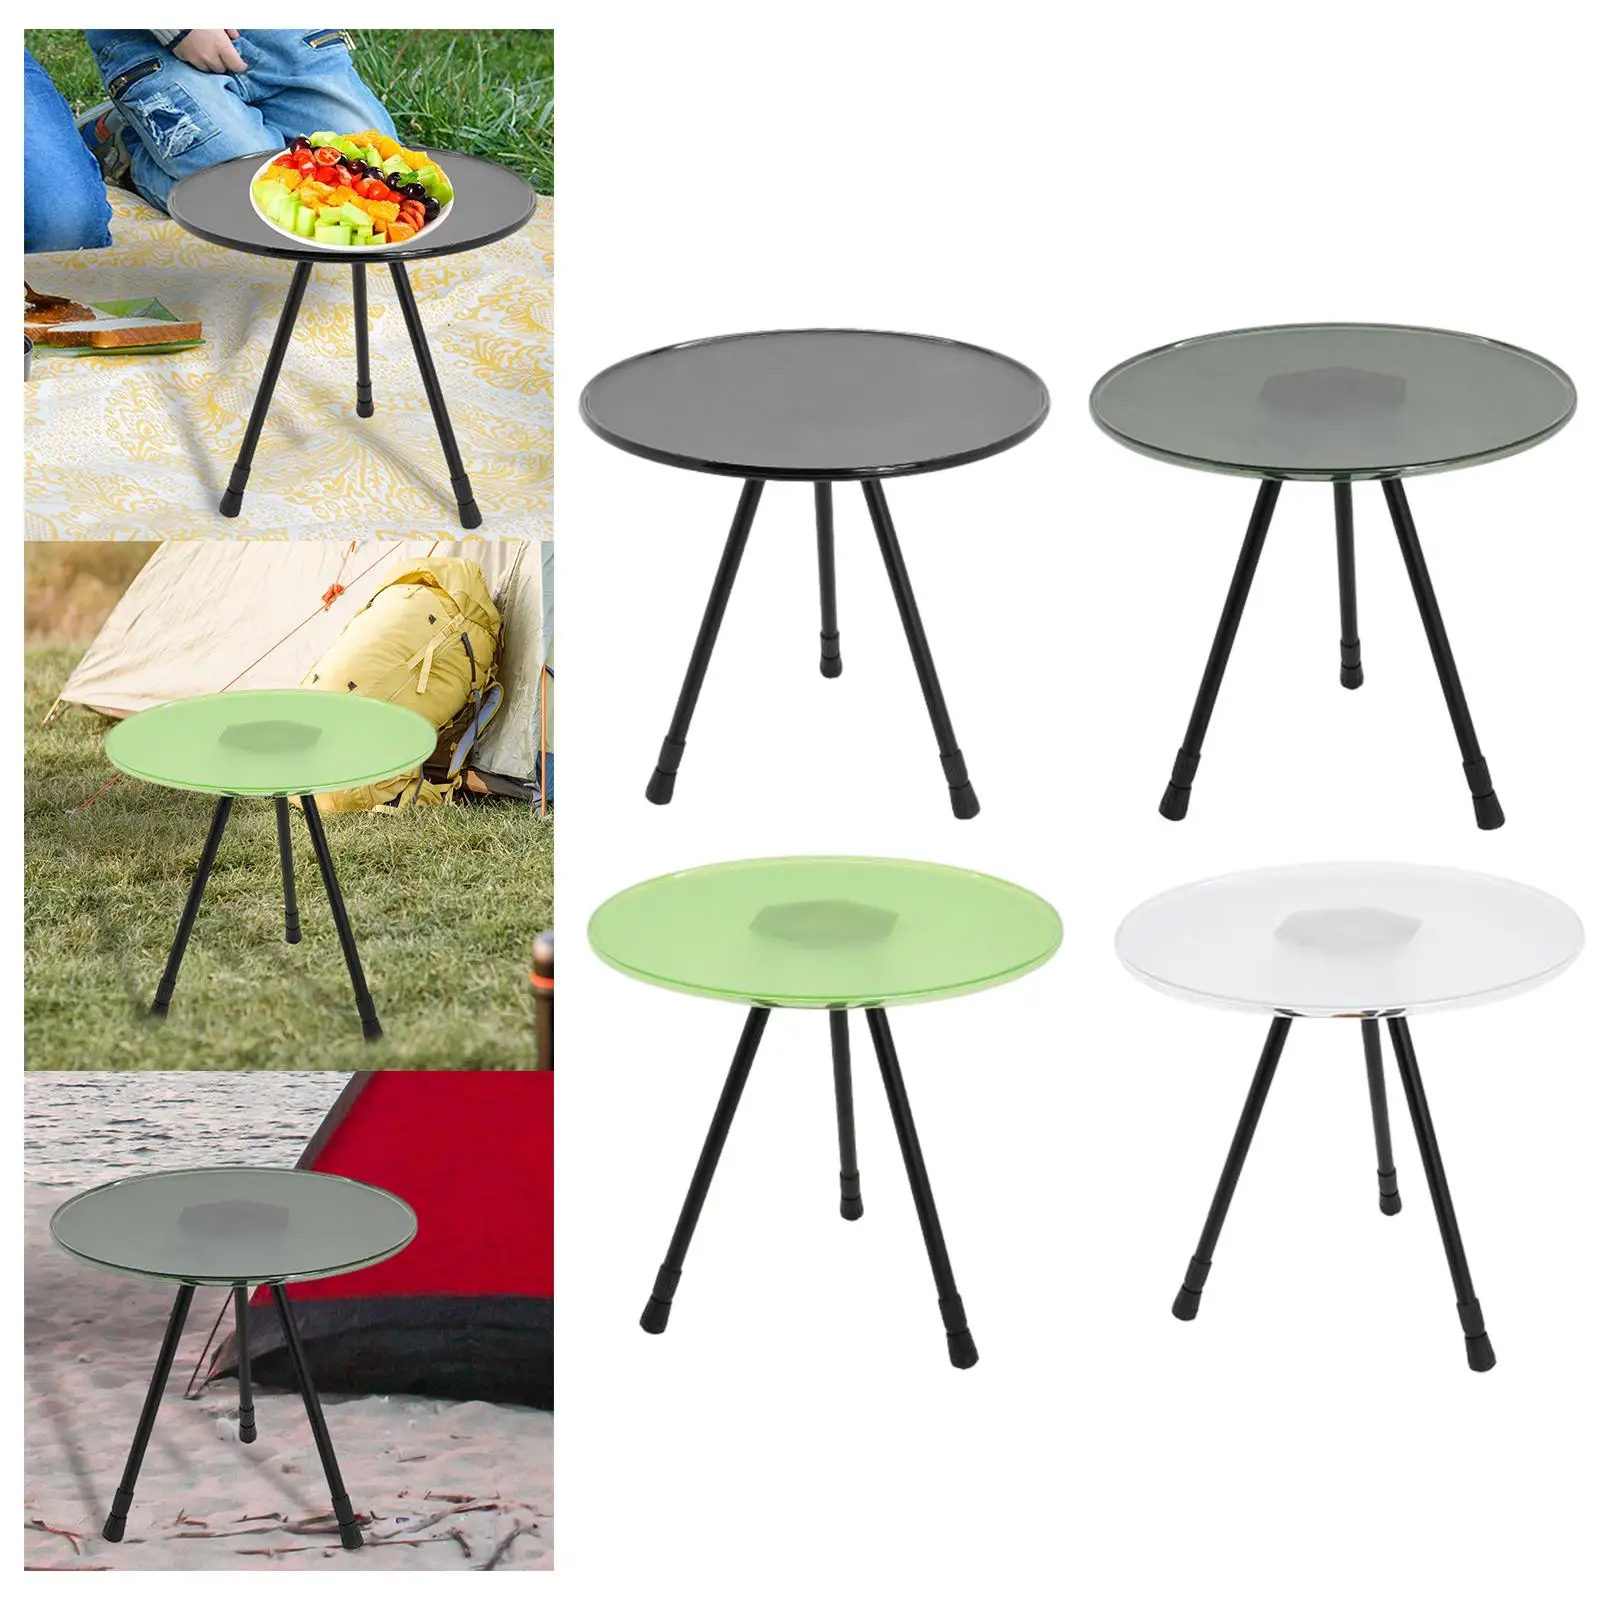 Three Legged Round Table Foldable Stable Outdoor Durable Adjustable Telescopic Lift Dining Desk for Garden Hiking Picnic Fishing